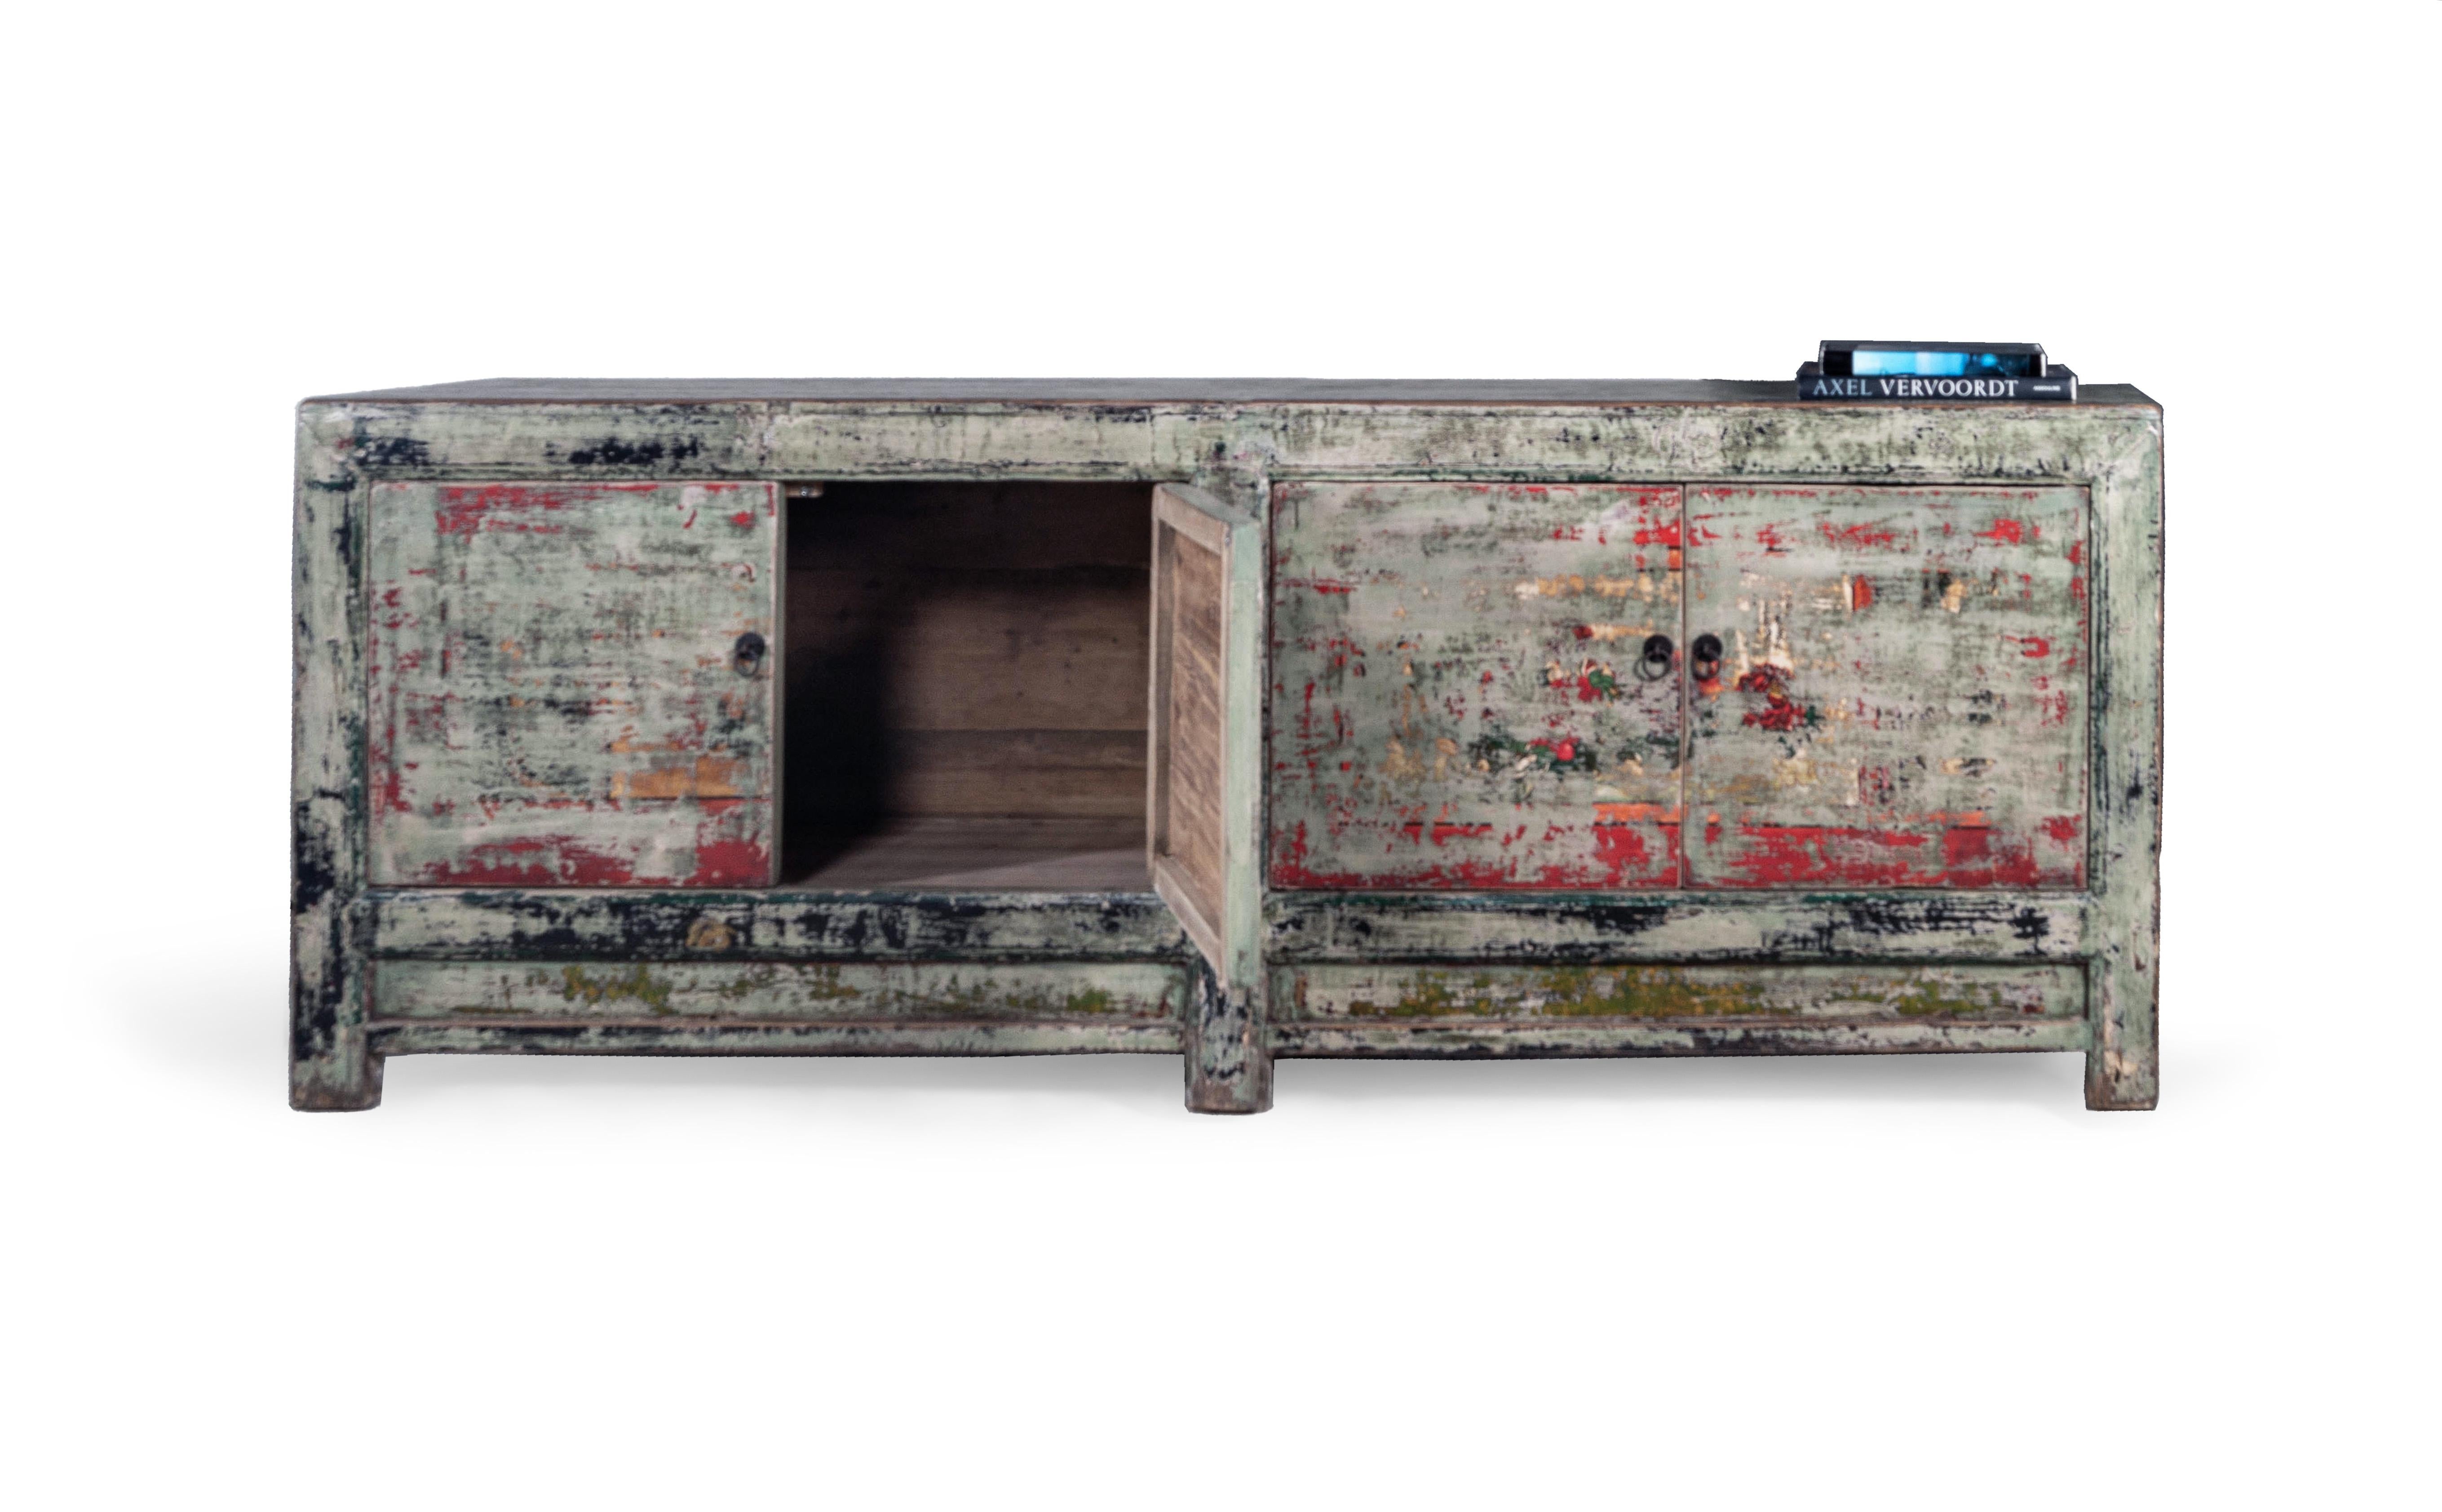 This beautiful one of a kind piece is a the perfect celebration of color and contrast featuring a primarily green paint finish distressed to expose other colors such as red, yellow, and orange. This server is undoubtebly a statement piece for a room